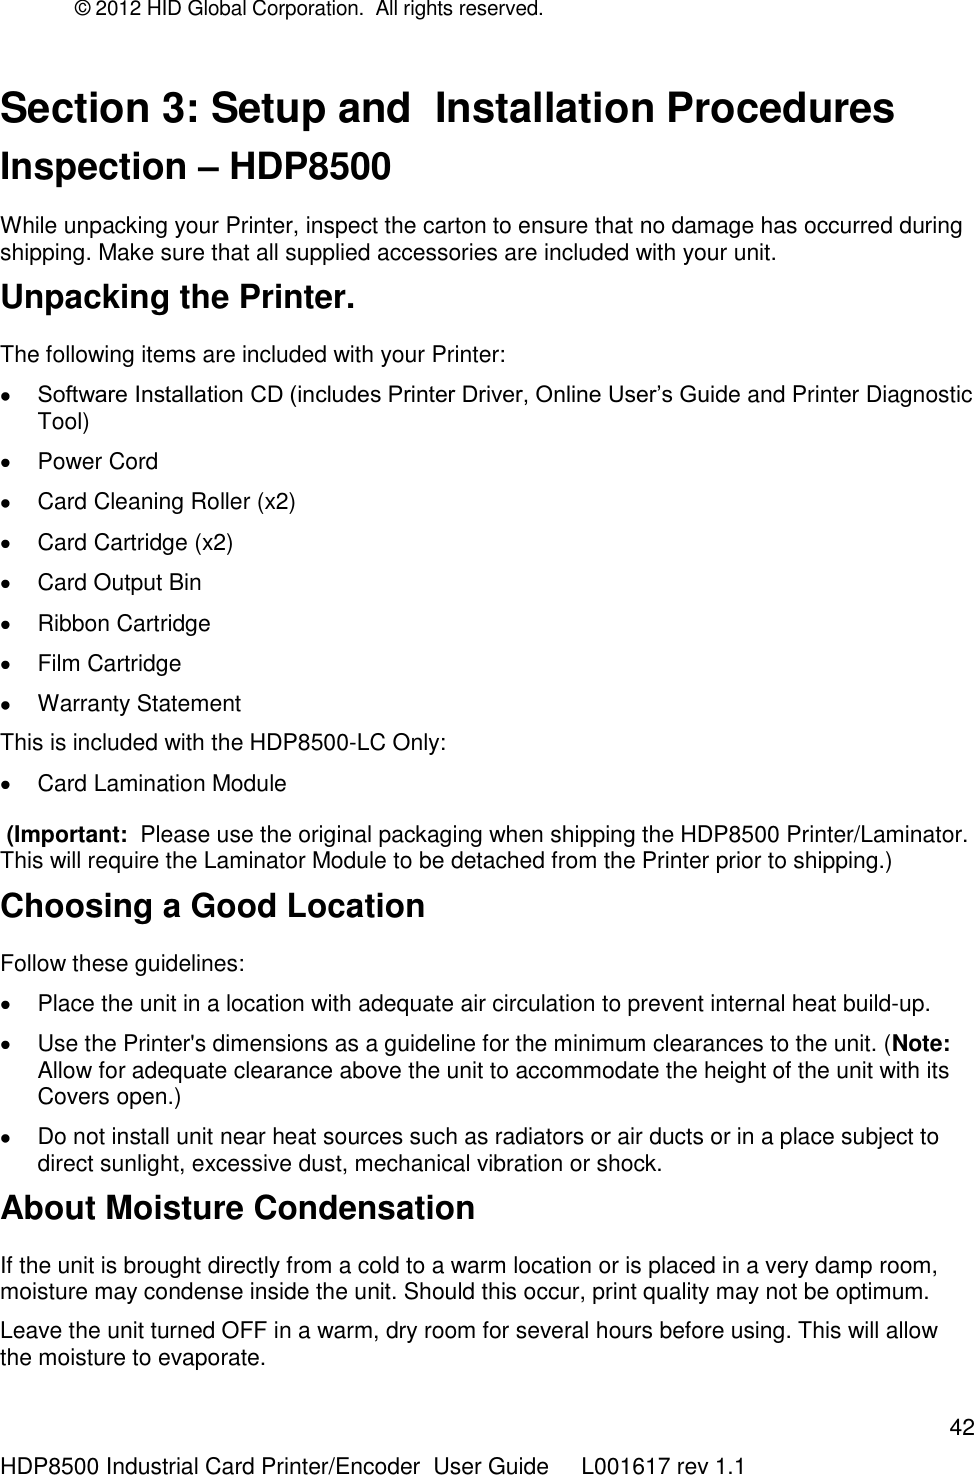 © 2012 HID Global Corporation.  All rights reserved.  42 HDP8500 Industrial Card Printer/Encoder  User Guide     L001617 rev 1.1 Section 3: Setup and  Installation Procedures Inspection – HDP8500 While unpacking your Printer, inspect the carton to ensure that no damage has occurred during shipping. Make sure that all supplied accessories are included with your unit. Unpacking the Printer. The following items are included with your Printer:  Software Installation CD (includes Printer Driver, Online User‟s Guide and Printer Diagnostic Tool)   Power Cord    Card Cleaning Roller (x2)   Card Cartridge (x2)   Card Output Bin   Ribbon Cartridge   Film Cartridge   Warranty Statement This is included with the HDP8500-LC Only:   Card Lamination Module   (Important:  Please use the original packaging when shipping the HDP8500 Printer/Laminator. This will require the Laminator Module to be detached from the Printer prior to shipping.) Choosing a Good Location Follow these guidelines:   Place the unit in a location with adequate air circulation to prevent internal heat build-up.   Use the Printer&apos;s dimensions as a guideline for the minimum clearances to the unit. (Note: Allow for adequate clearance above the unit to accommodate the height of the unit with its Covers open.)   Do not install unit near heat sources such as radiators or air ducts or in a place subject to direct sunlight, excessive dust, mechanical vibration or shock. About Moisture Condensation If the unit is brought directly from a cold to a warm location or is placed in a very damp room, moisture may condense inside the unit. Should this occur, print quality may not be optimum.  Leave the unit turned OFF in a warm, dry room for several hours before using. This will allow the moisture to evaporate. 